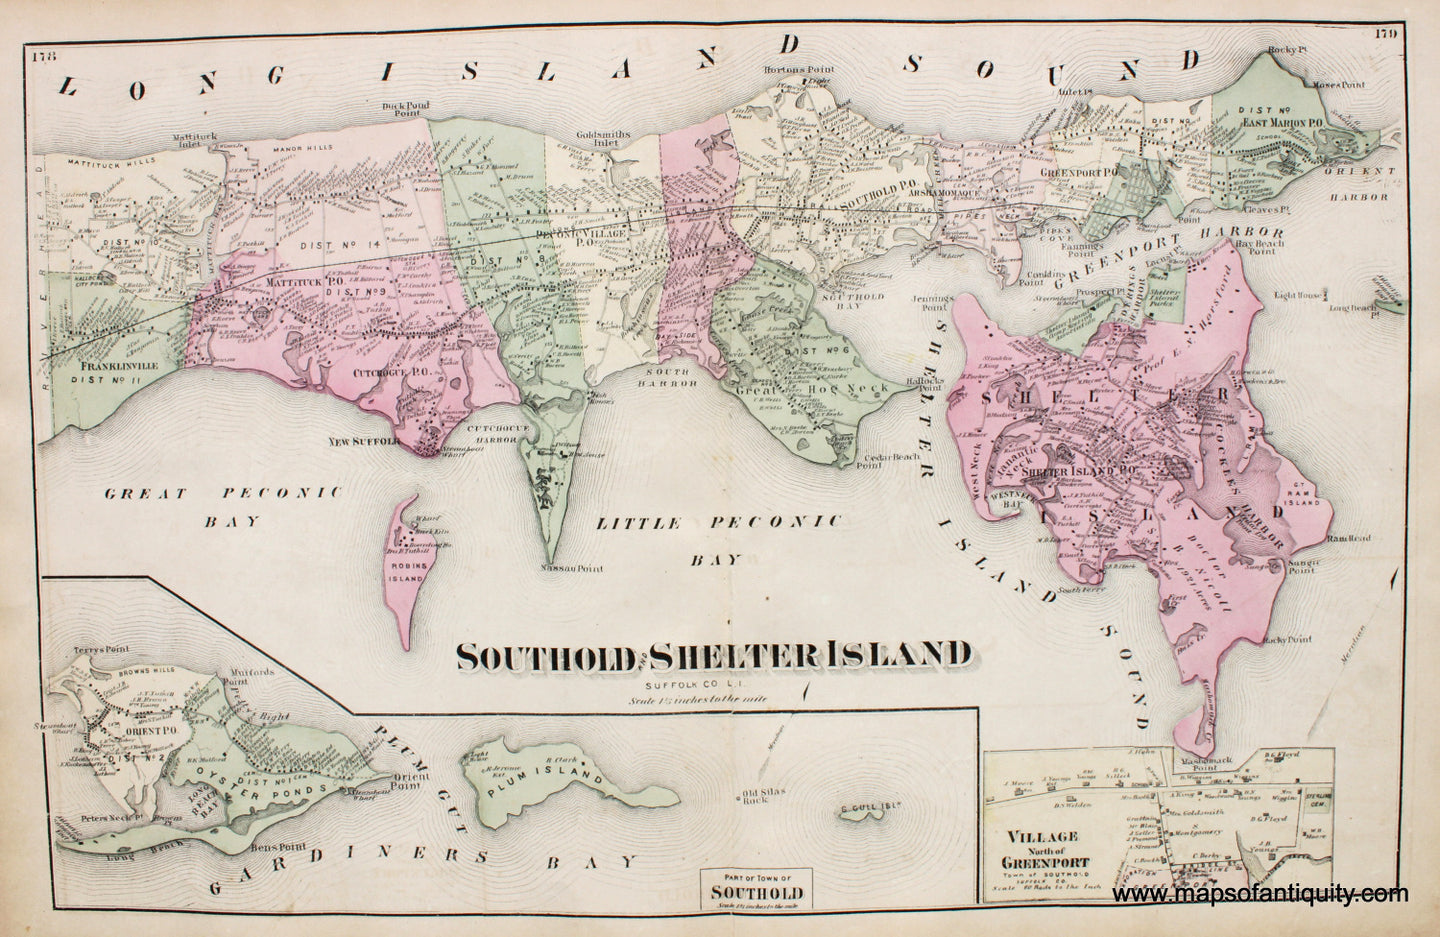 Antique-Hand-Colored-Map-Southold-and-Shelter-Island-verso-Cutchogue-Peconic-Village-East-Marion-Orient-New-Suffolk-and-Village-Adjoining-Southold-(NY)-**********-United-States-Northeast-1873-Beers-Maps-Of-Antiquity